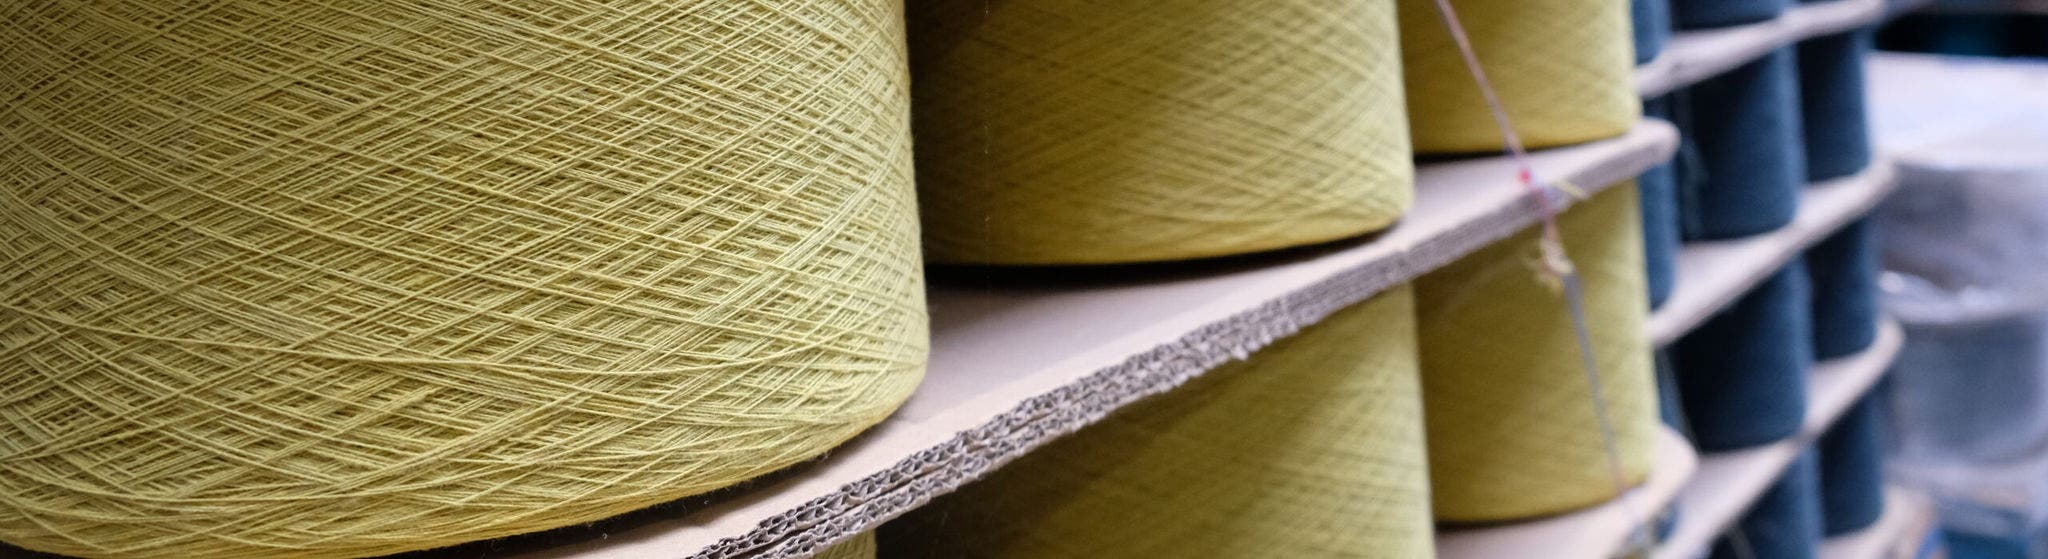 Chalieux Weaving mills offer a sustainable approach to weaving, supported by state-of-the-art Stäubli Jacquard machines wiith 30% less energy consumption